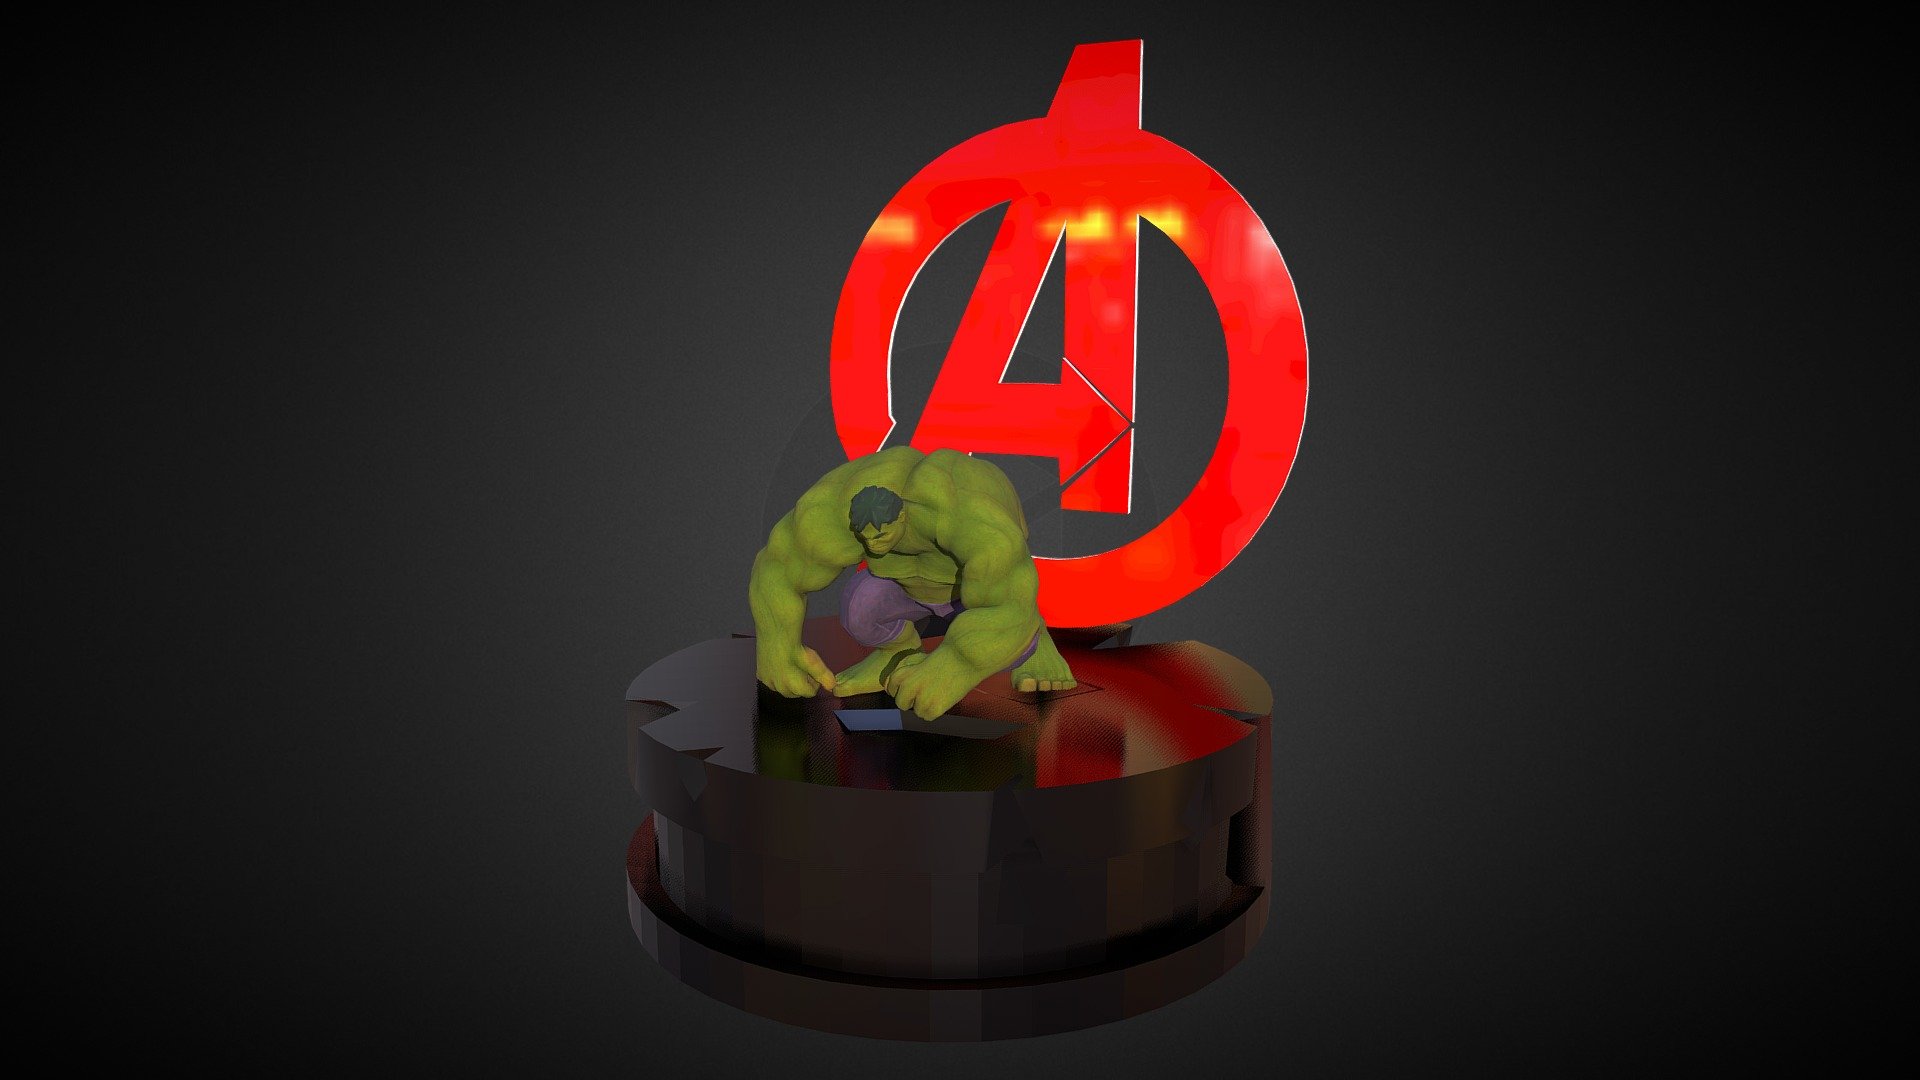 Hulk made in Zbrush for my portfolio, the texture are made by my friend from college in Substance 3d model